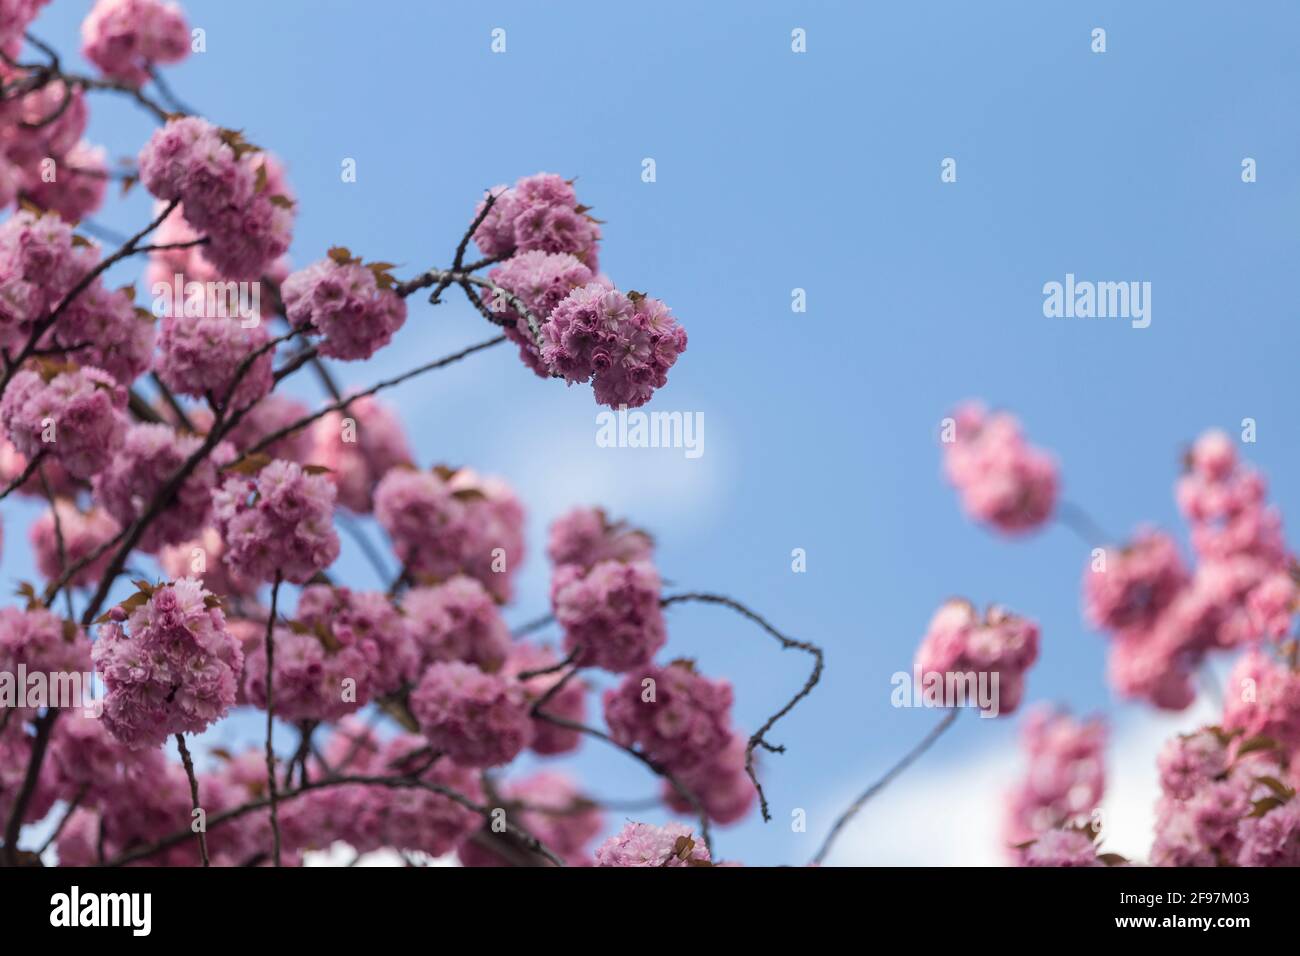 Blooming cherry blossoms, sakura trees in Bonn, former capital of Germany on Heerstrasse Stock Photo